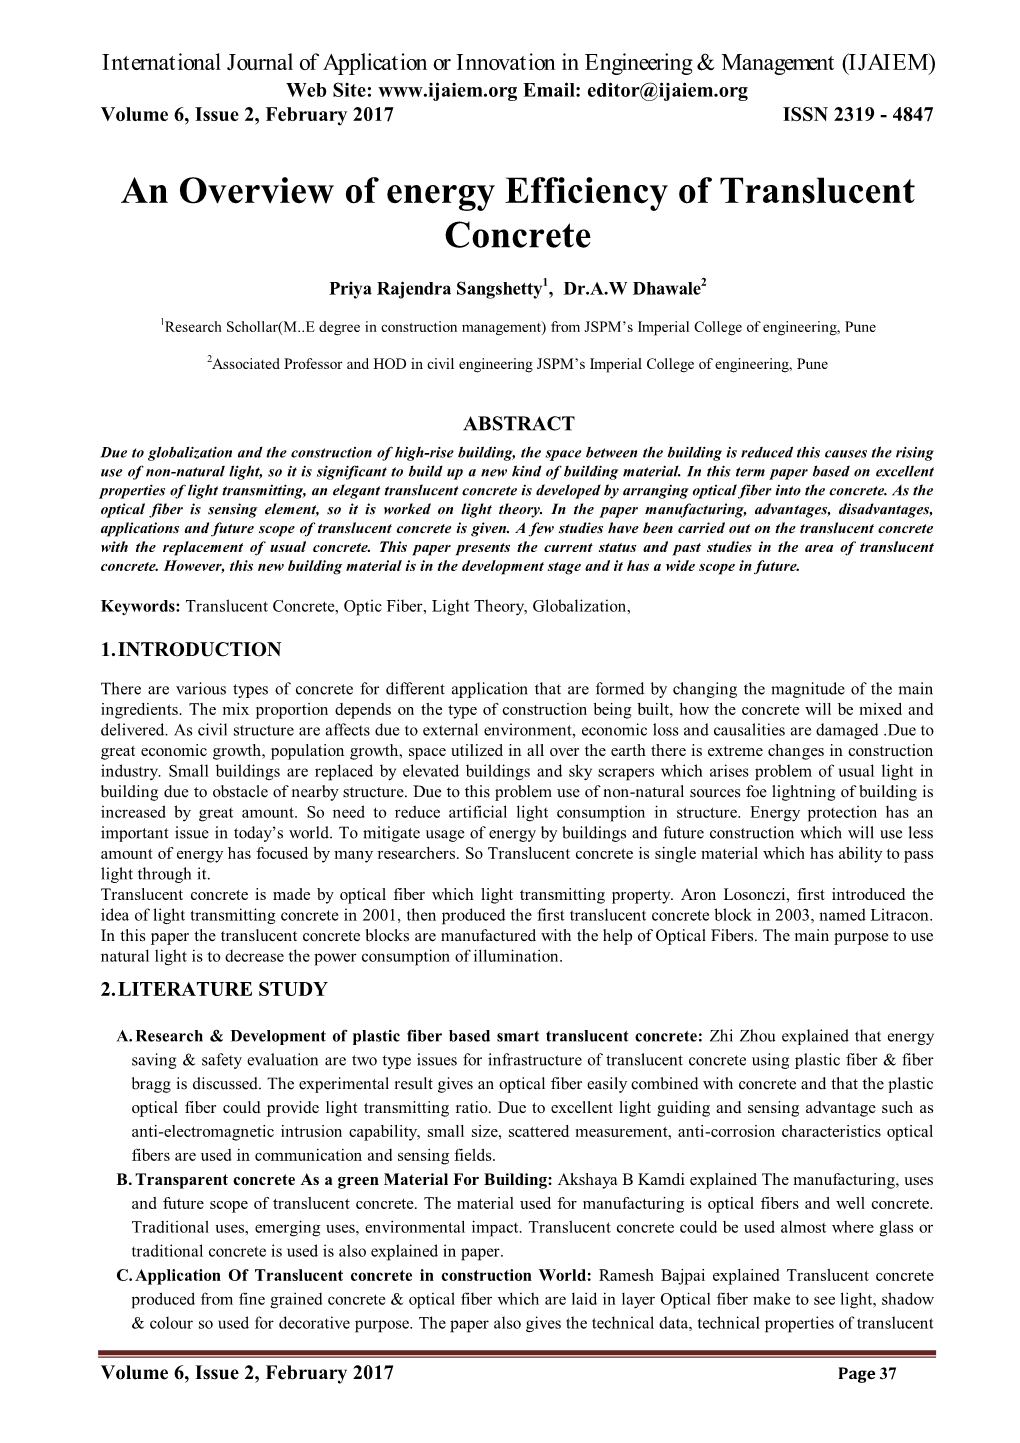 An Overview of Energy Efficiency of Translucent Concrete